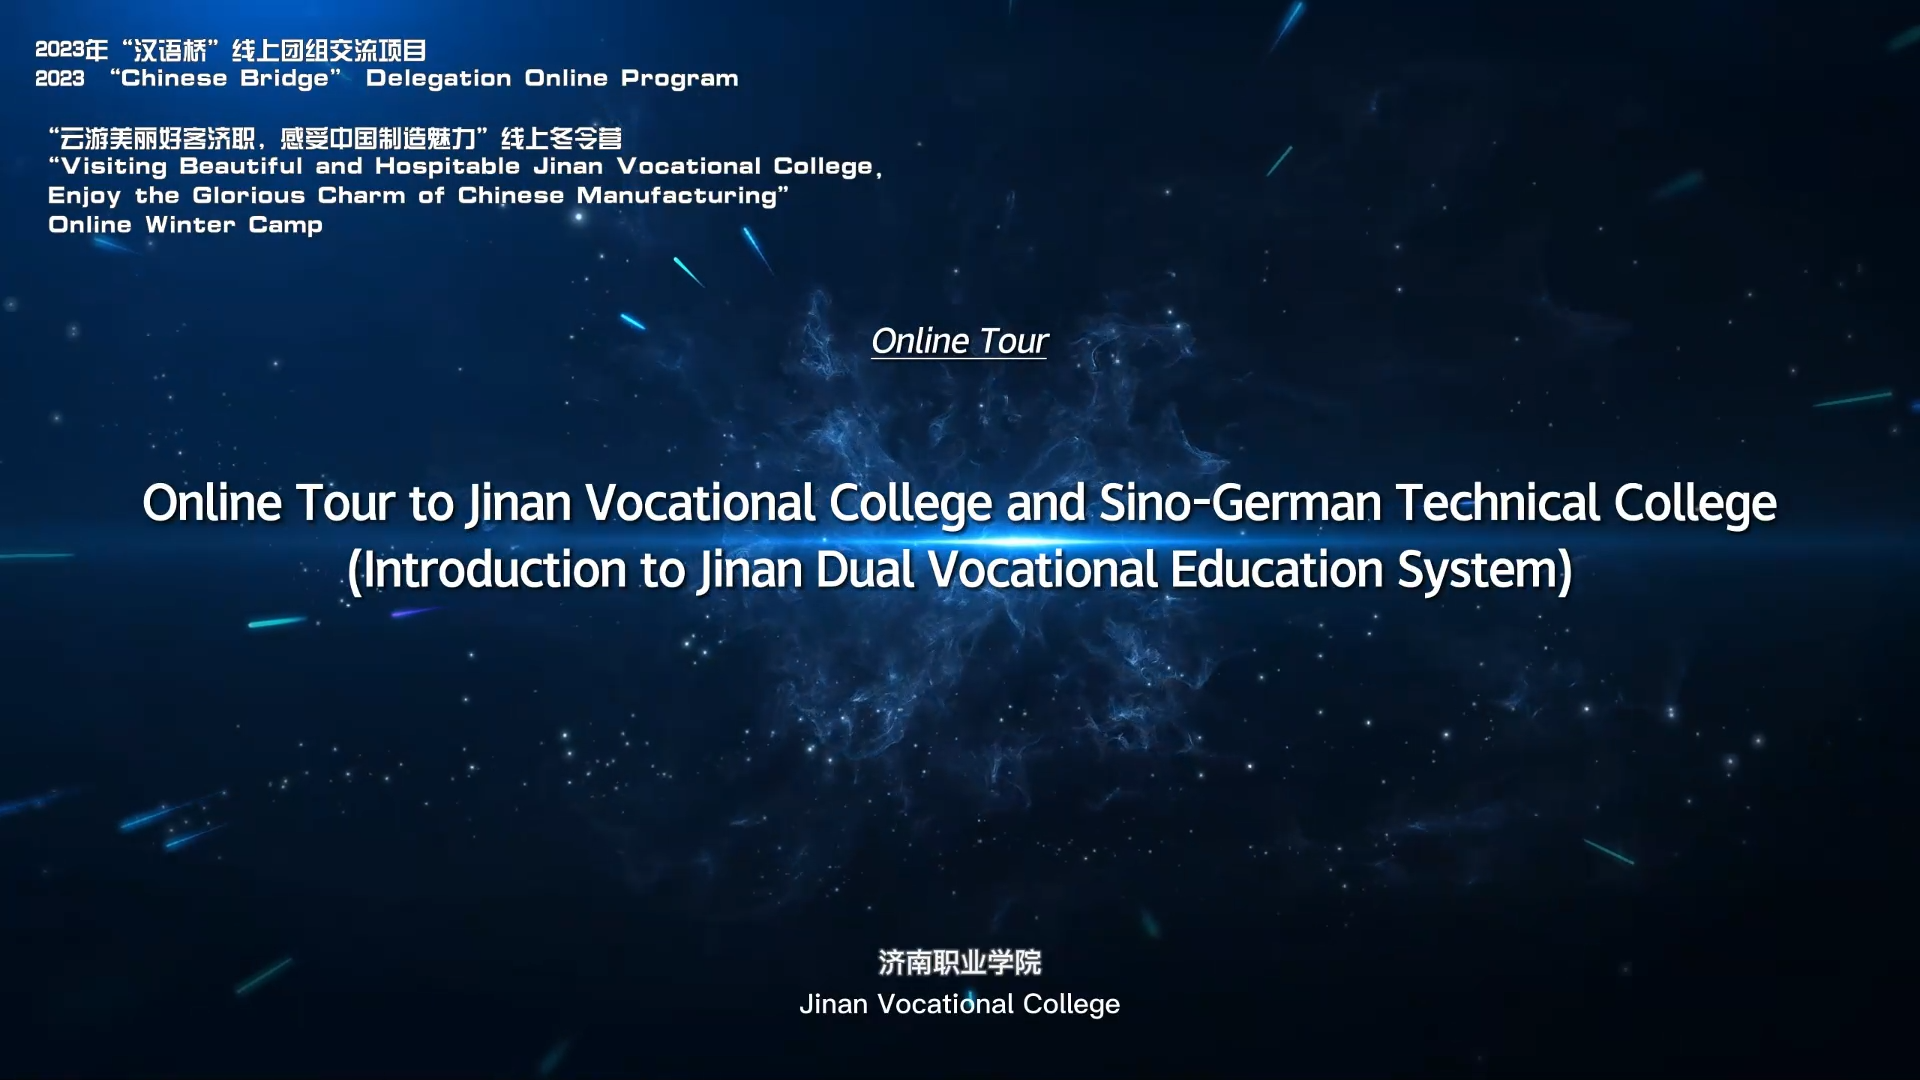 Online Tour-Online Tour to Jinan Vocational College and Sino-German Technical College (Introduction to Jinan Dual Vocational Education System)